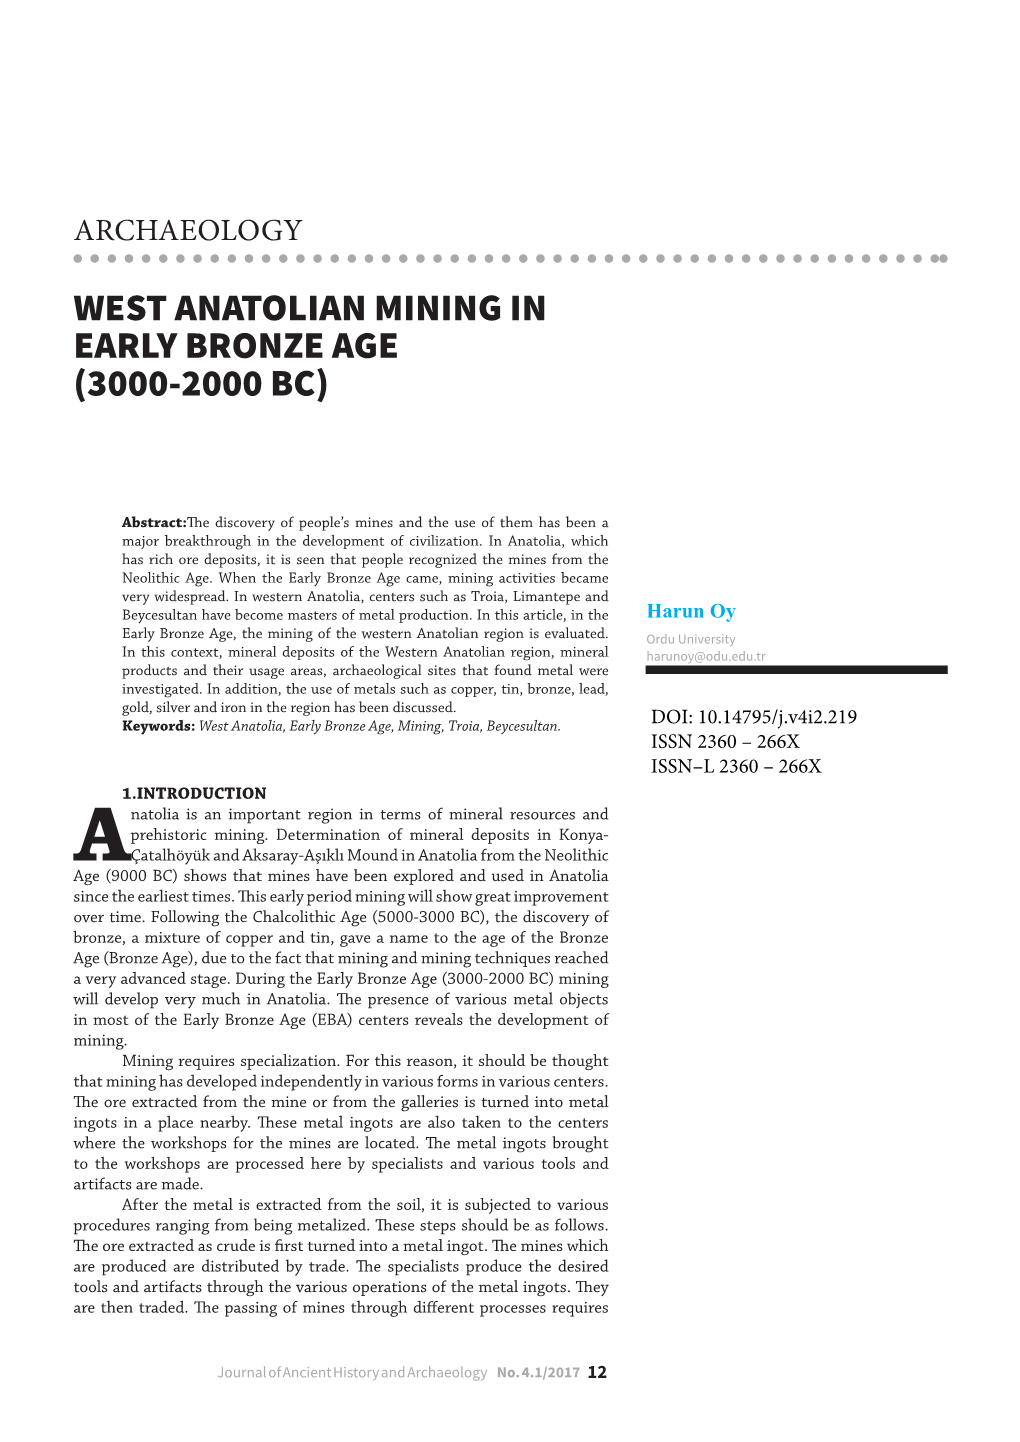 West Anatolian Mining in Early Bronze Age (3000-2000 Bc)